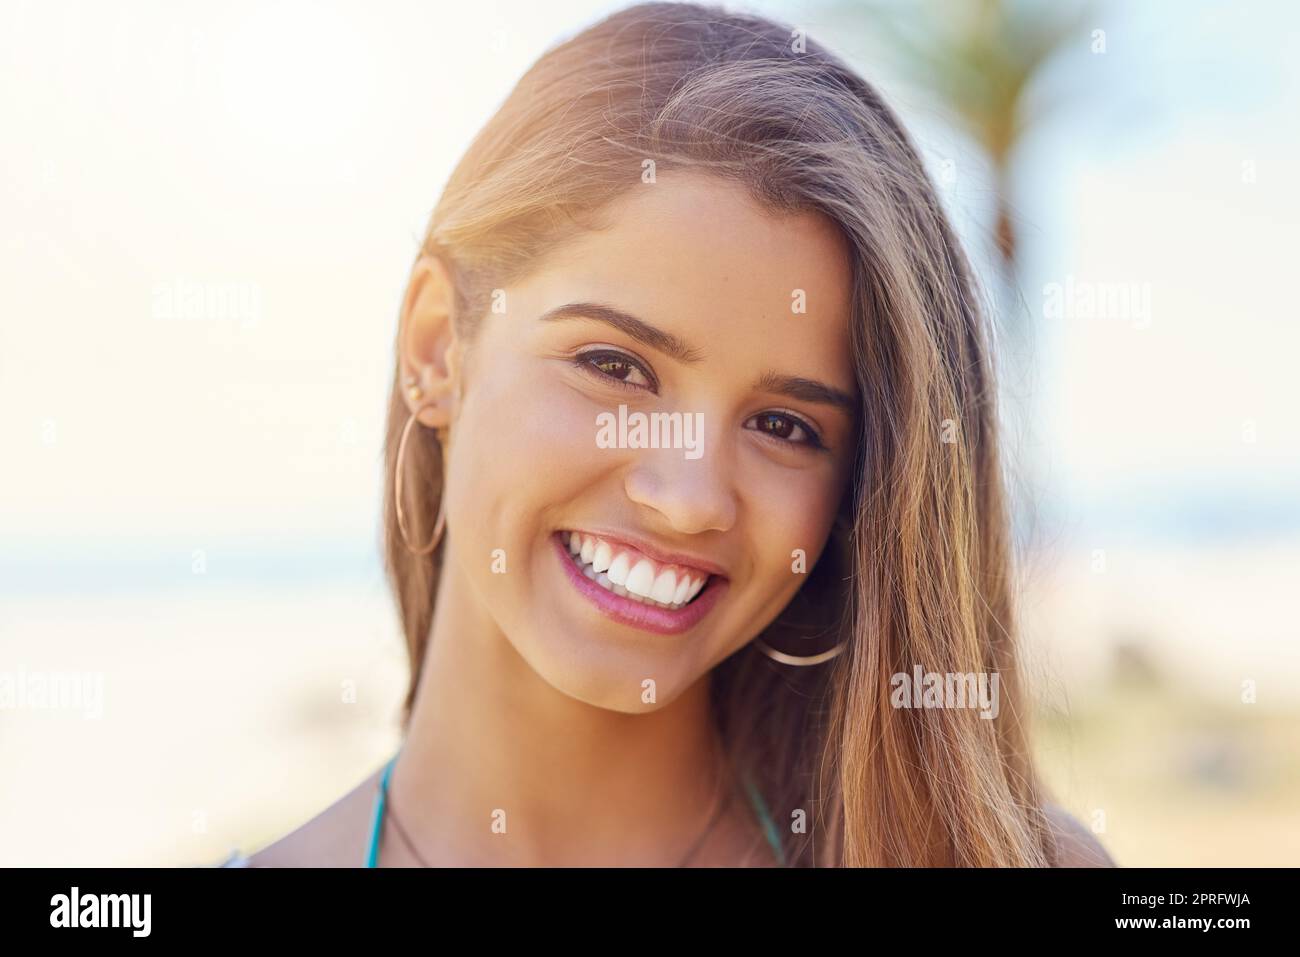 The beach is the only place I need to be. Portrait of an attractive young woman standing outside on a sunny day. Stock Photo